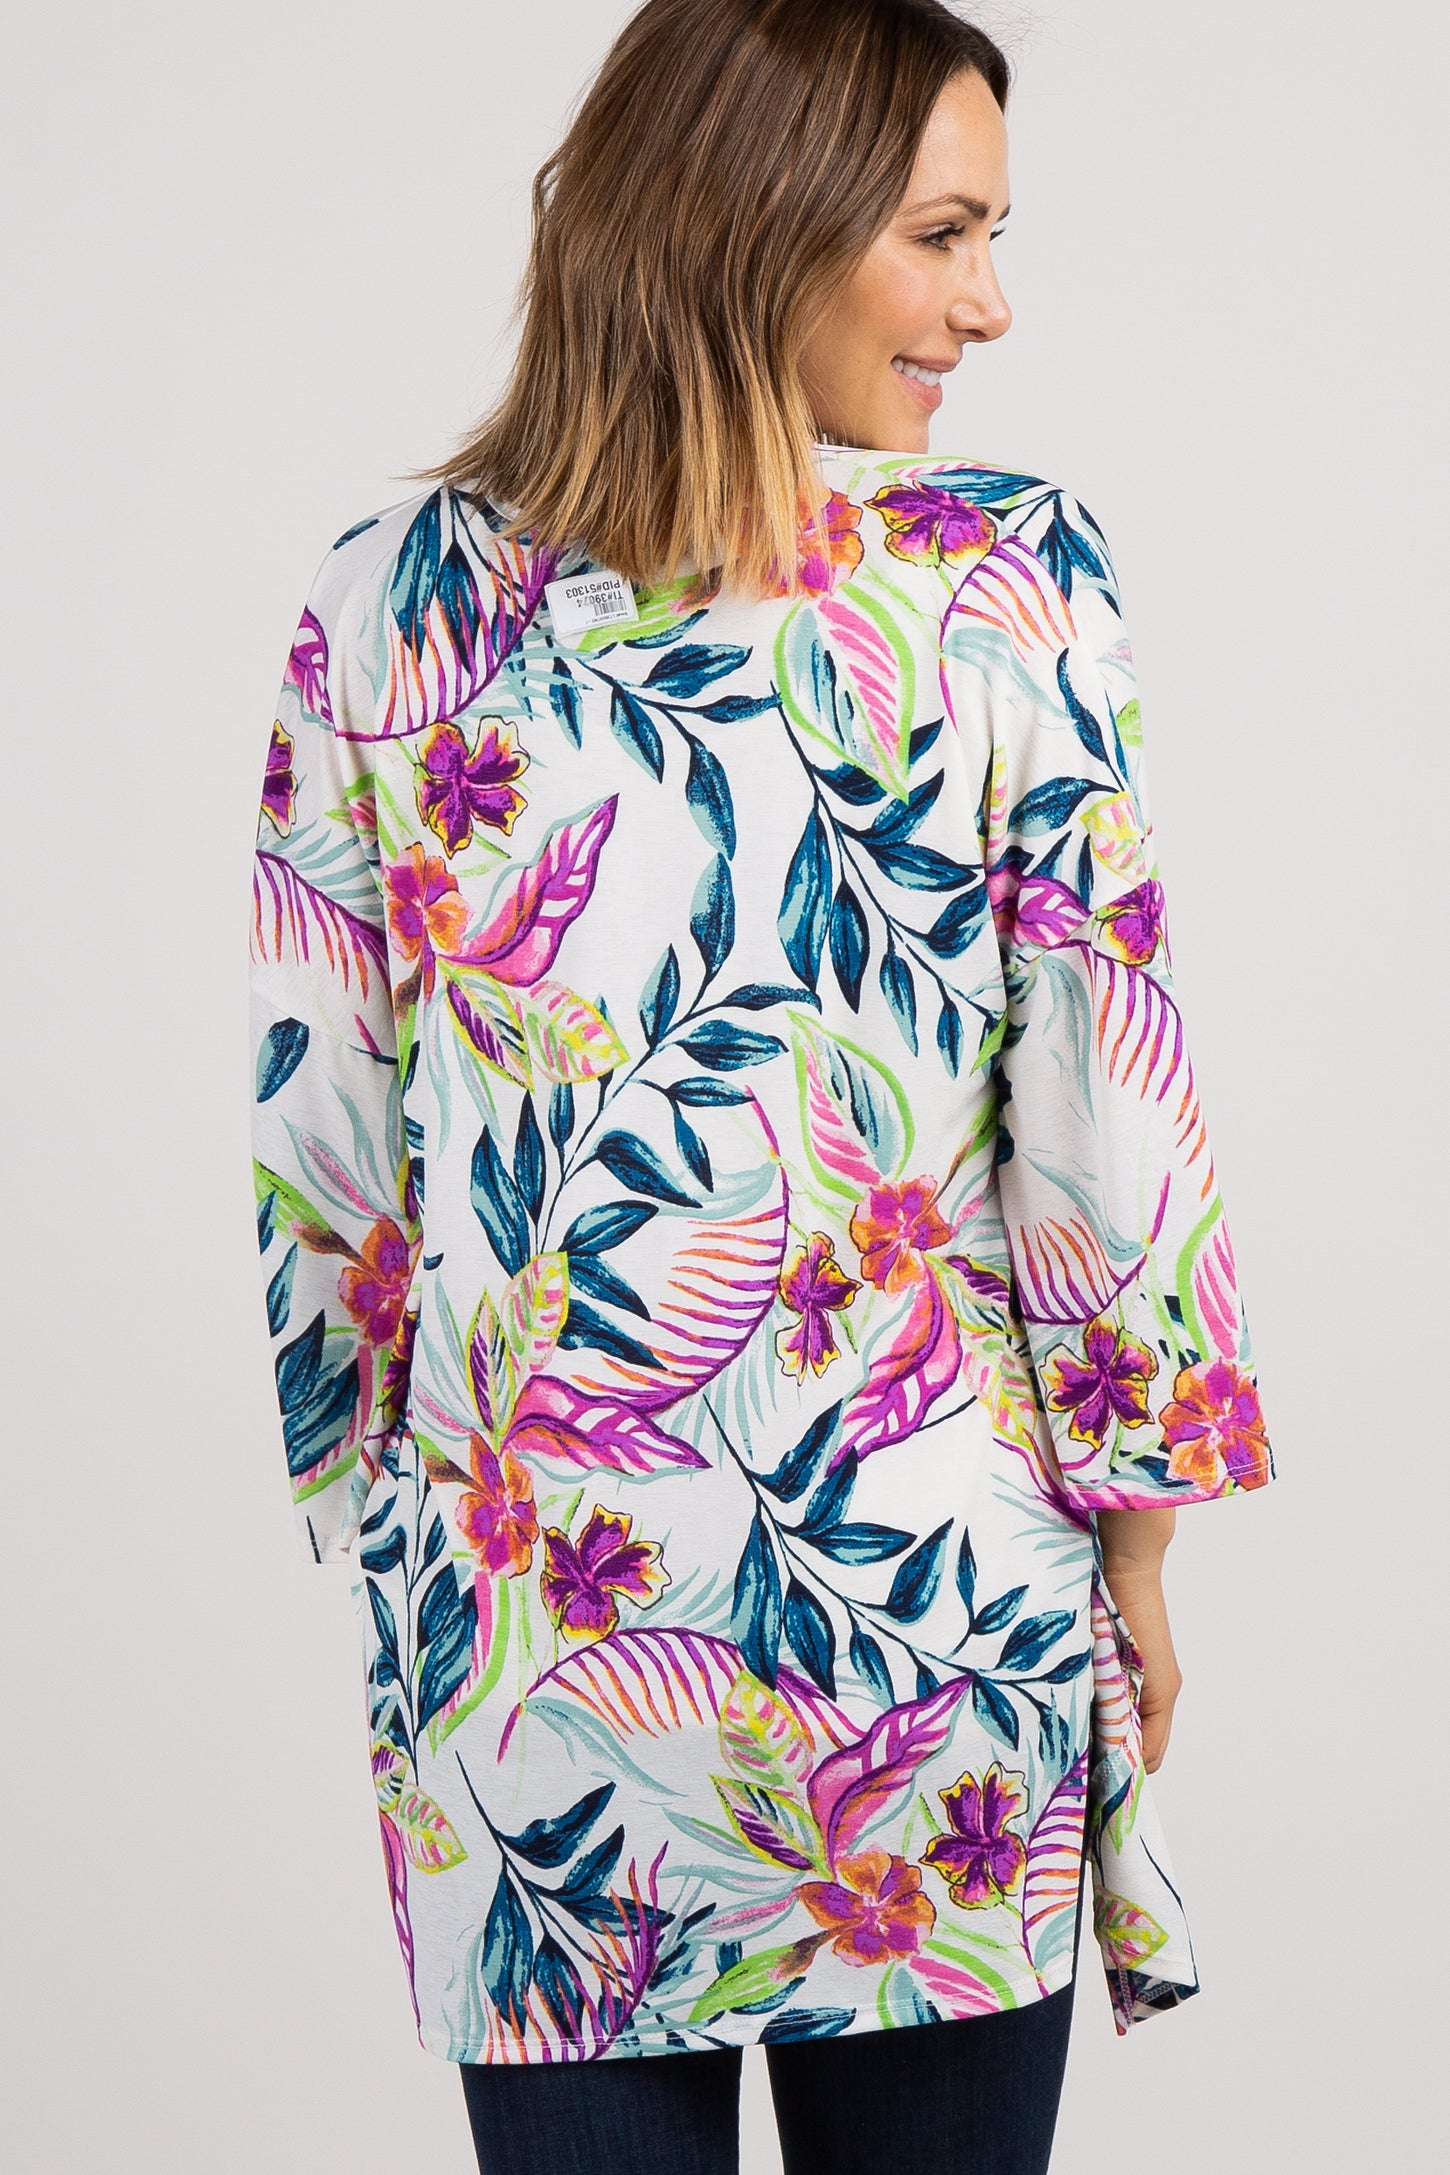 Multi-Color Floral 3/4 Bell Sleeve Cover Up